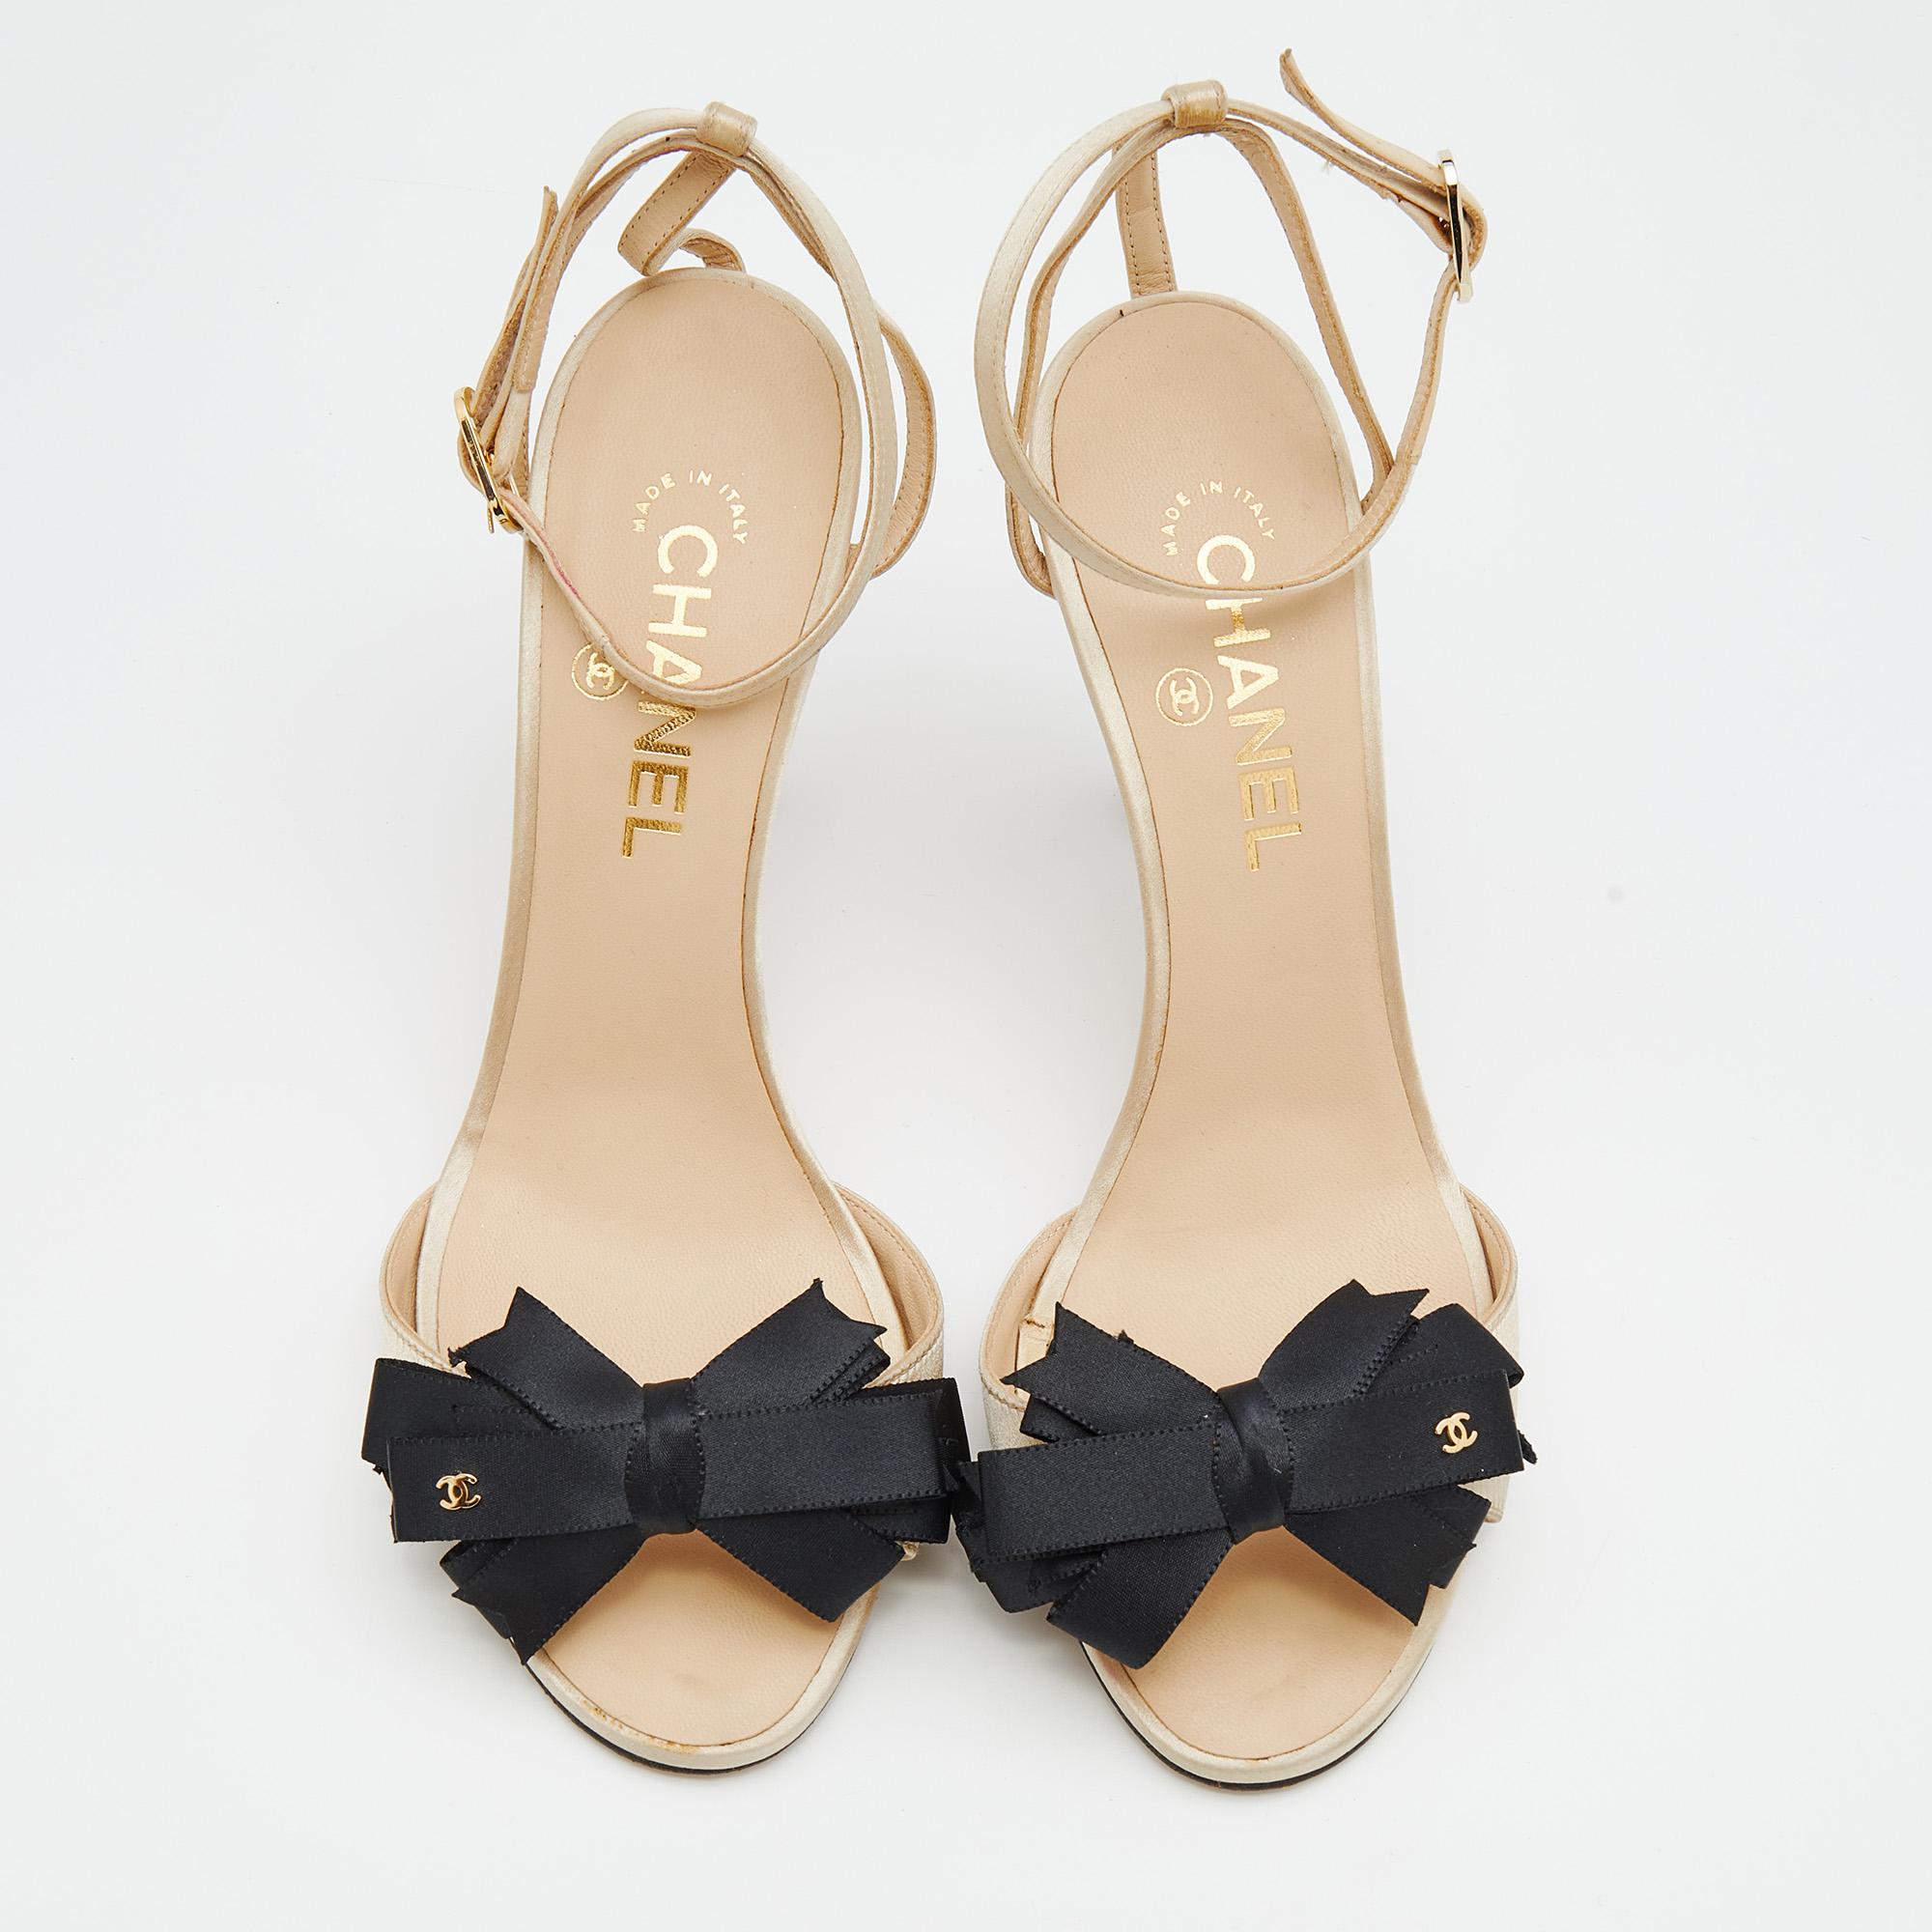 Much loved by women, Chanel continues to charm us with gorgeous designs, and these sandals are no exception. The fashionable light beige satin sandals come in a sleek form decorated with CC bows on the vamp straps. They flaunt buckled ankle straps